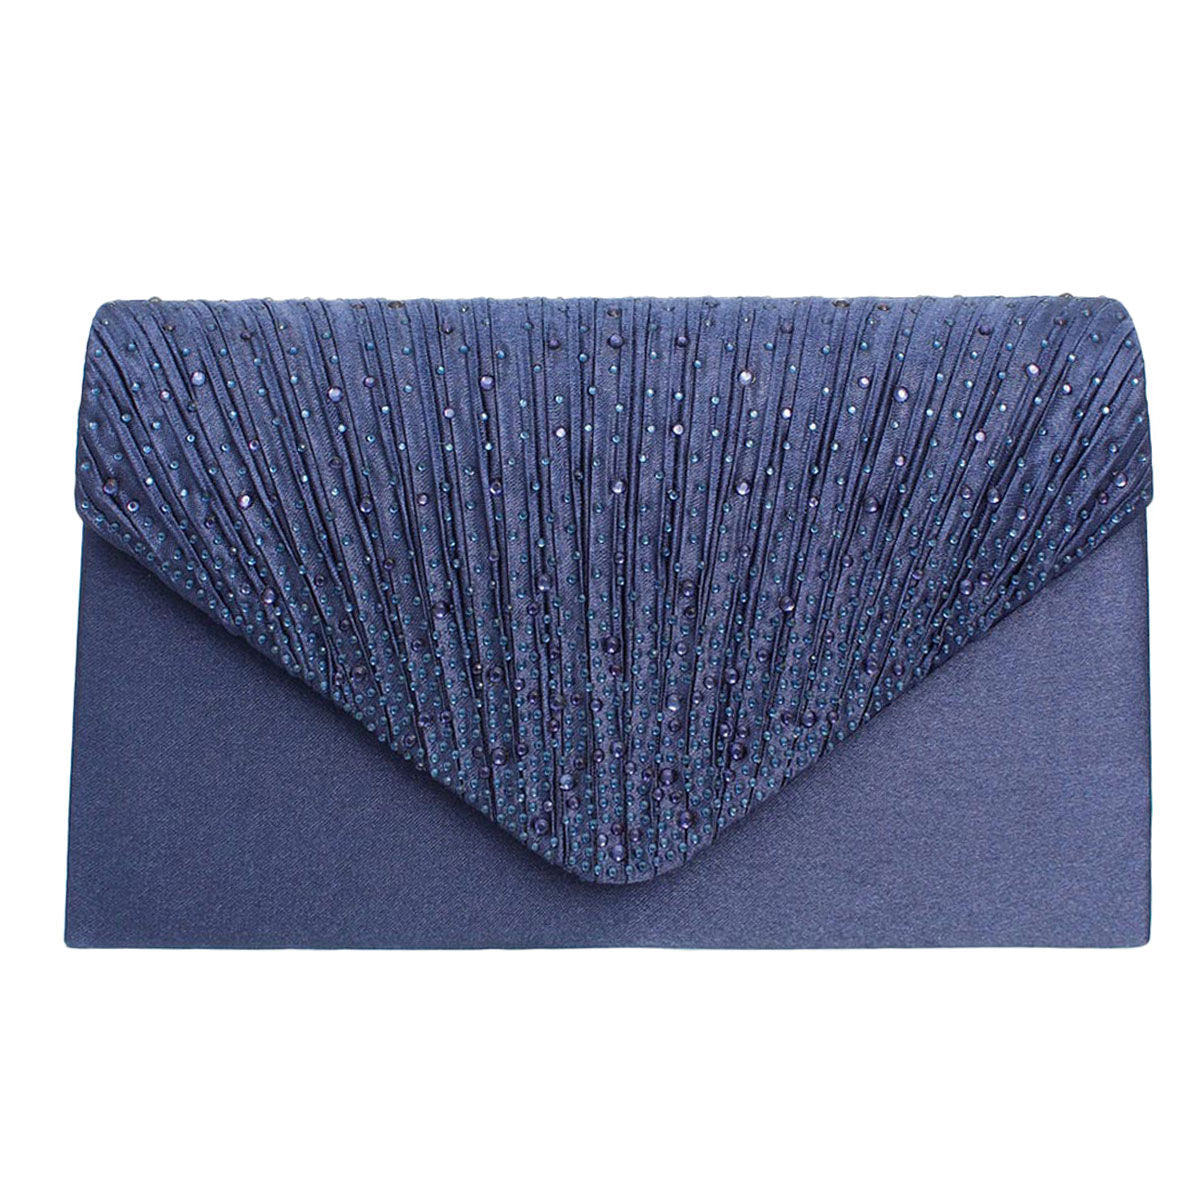 Clutch Navy Ruched Bag for Women